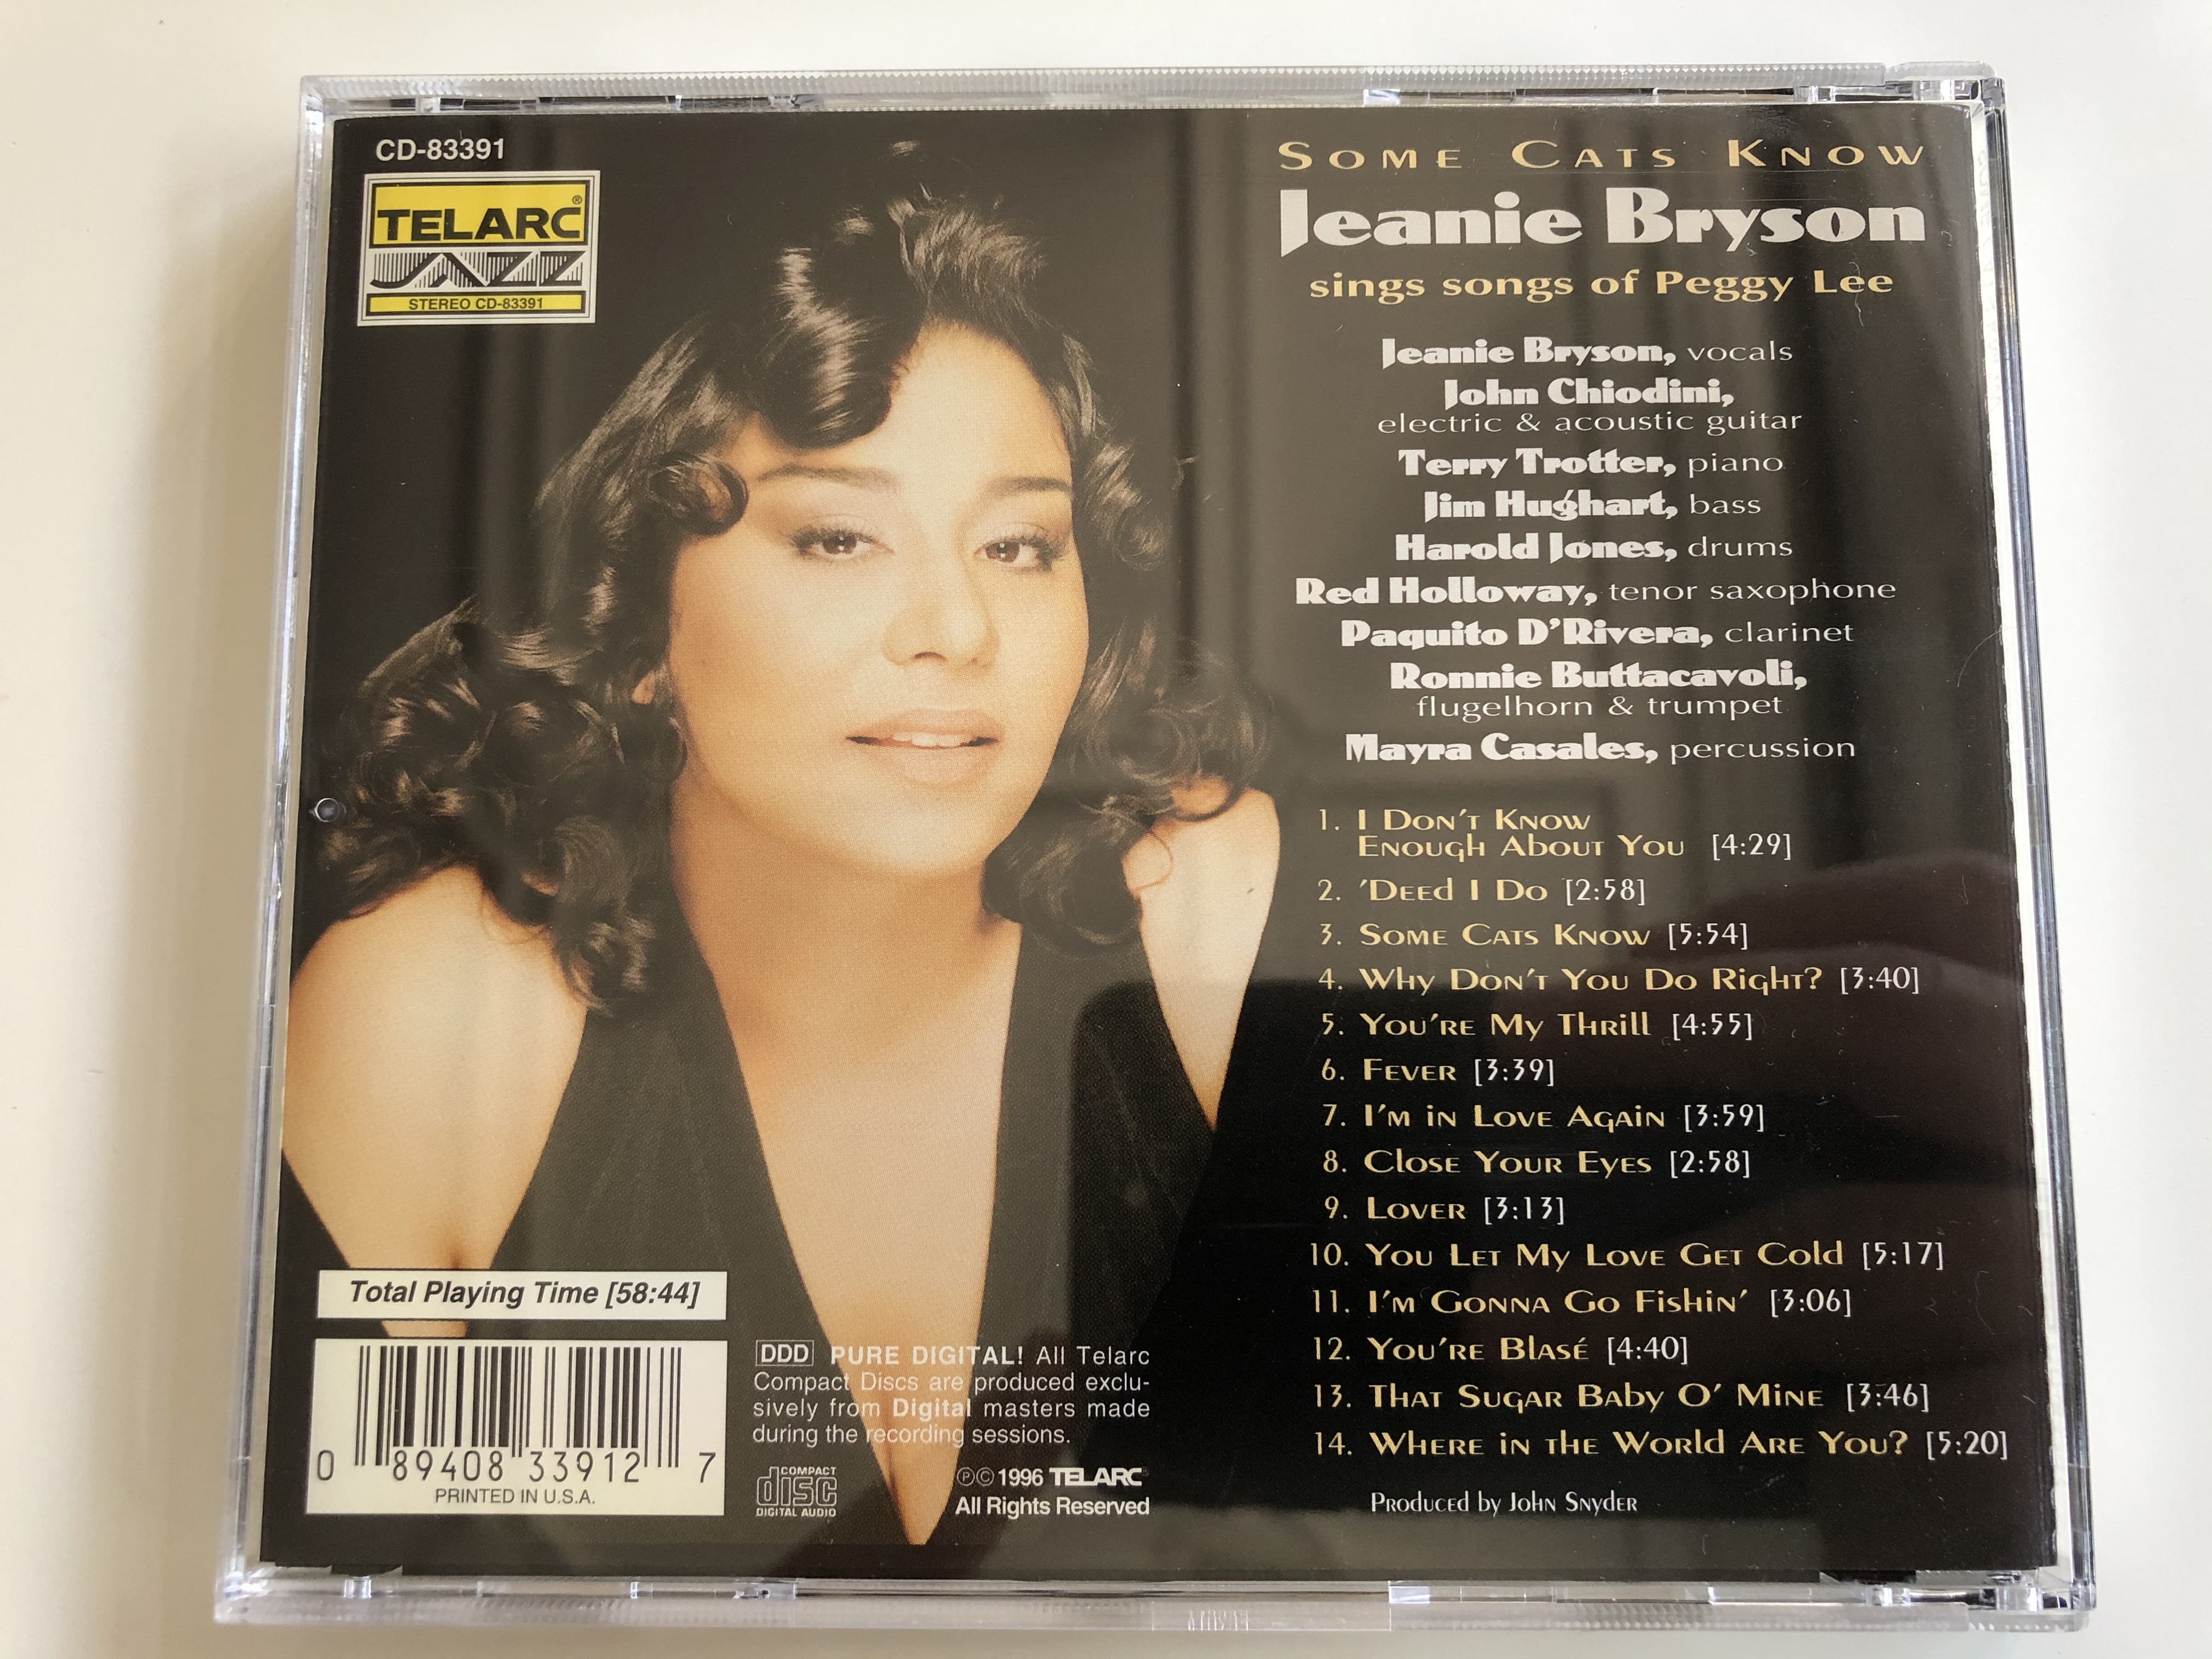 some-cats-know-jeanie-bryson-sings-songs-of-peggy-lee-telarc-jazz-audio-cd-1996-cd-83391-7-.jpg